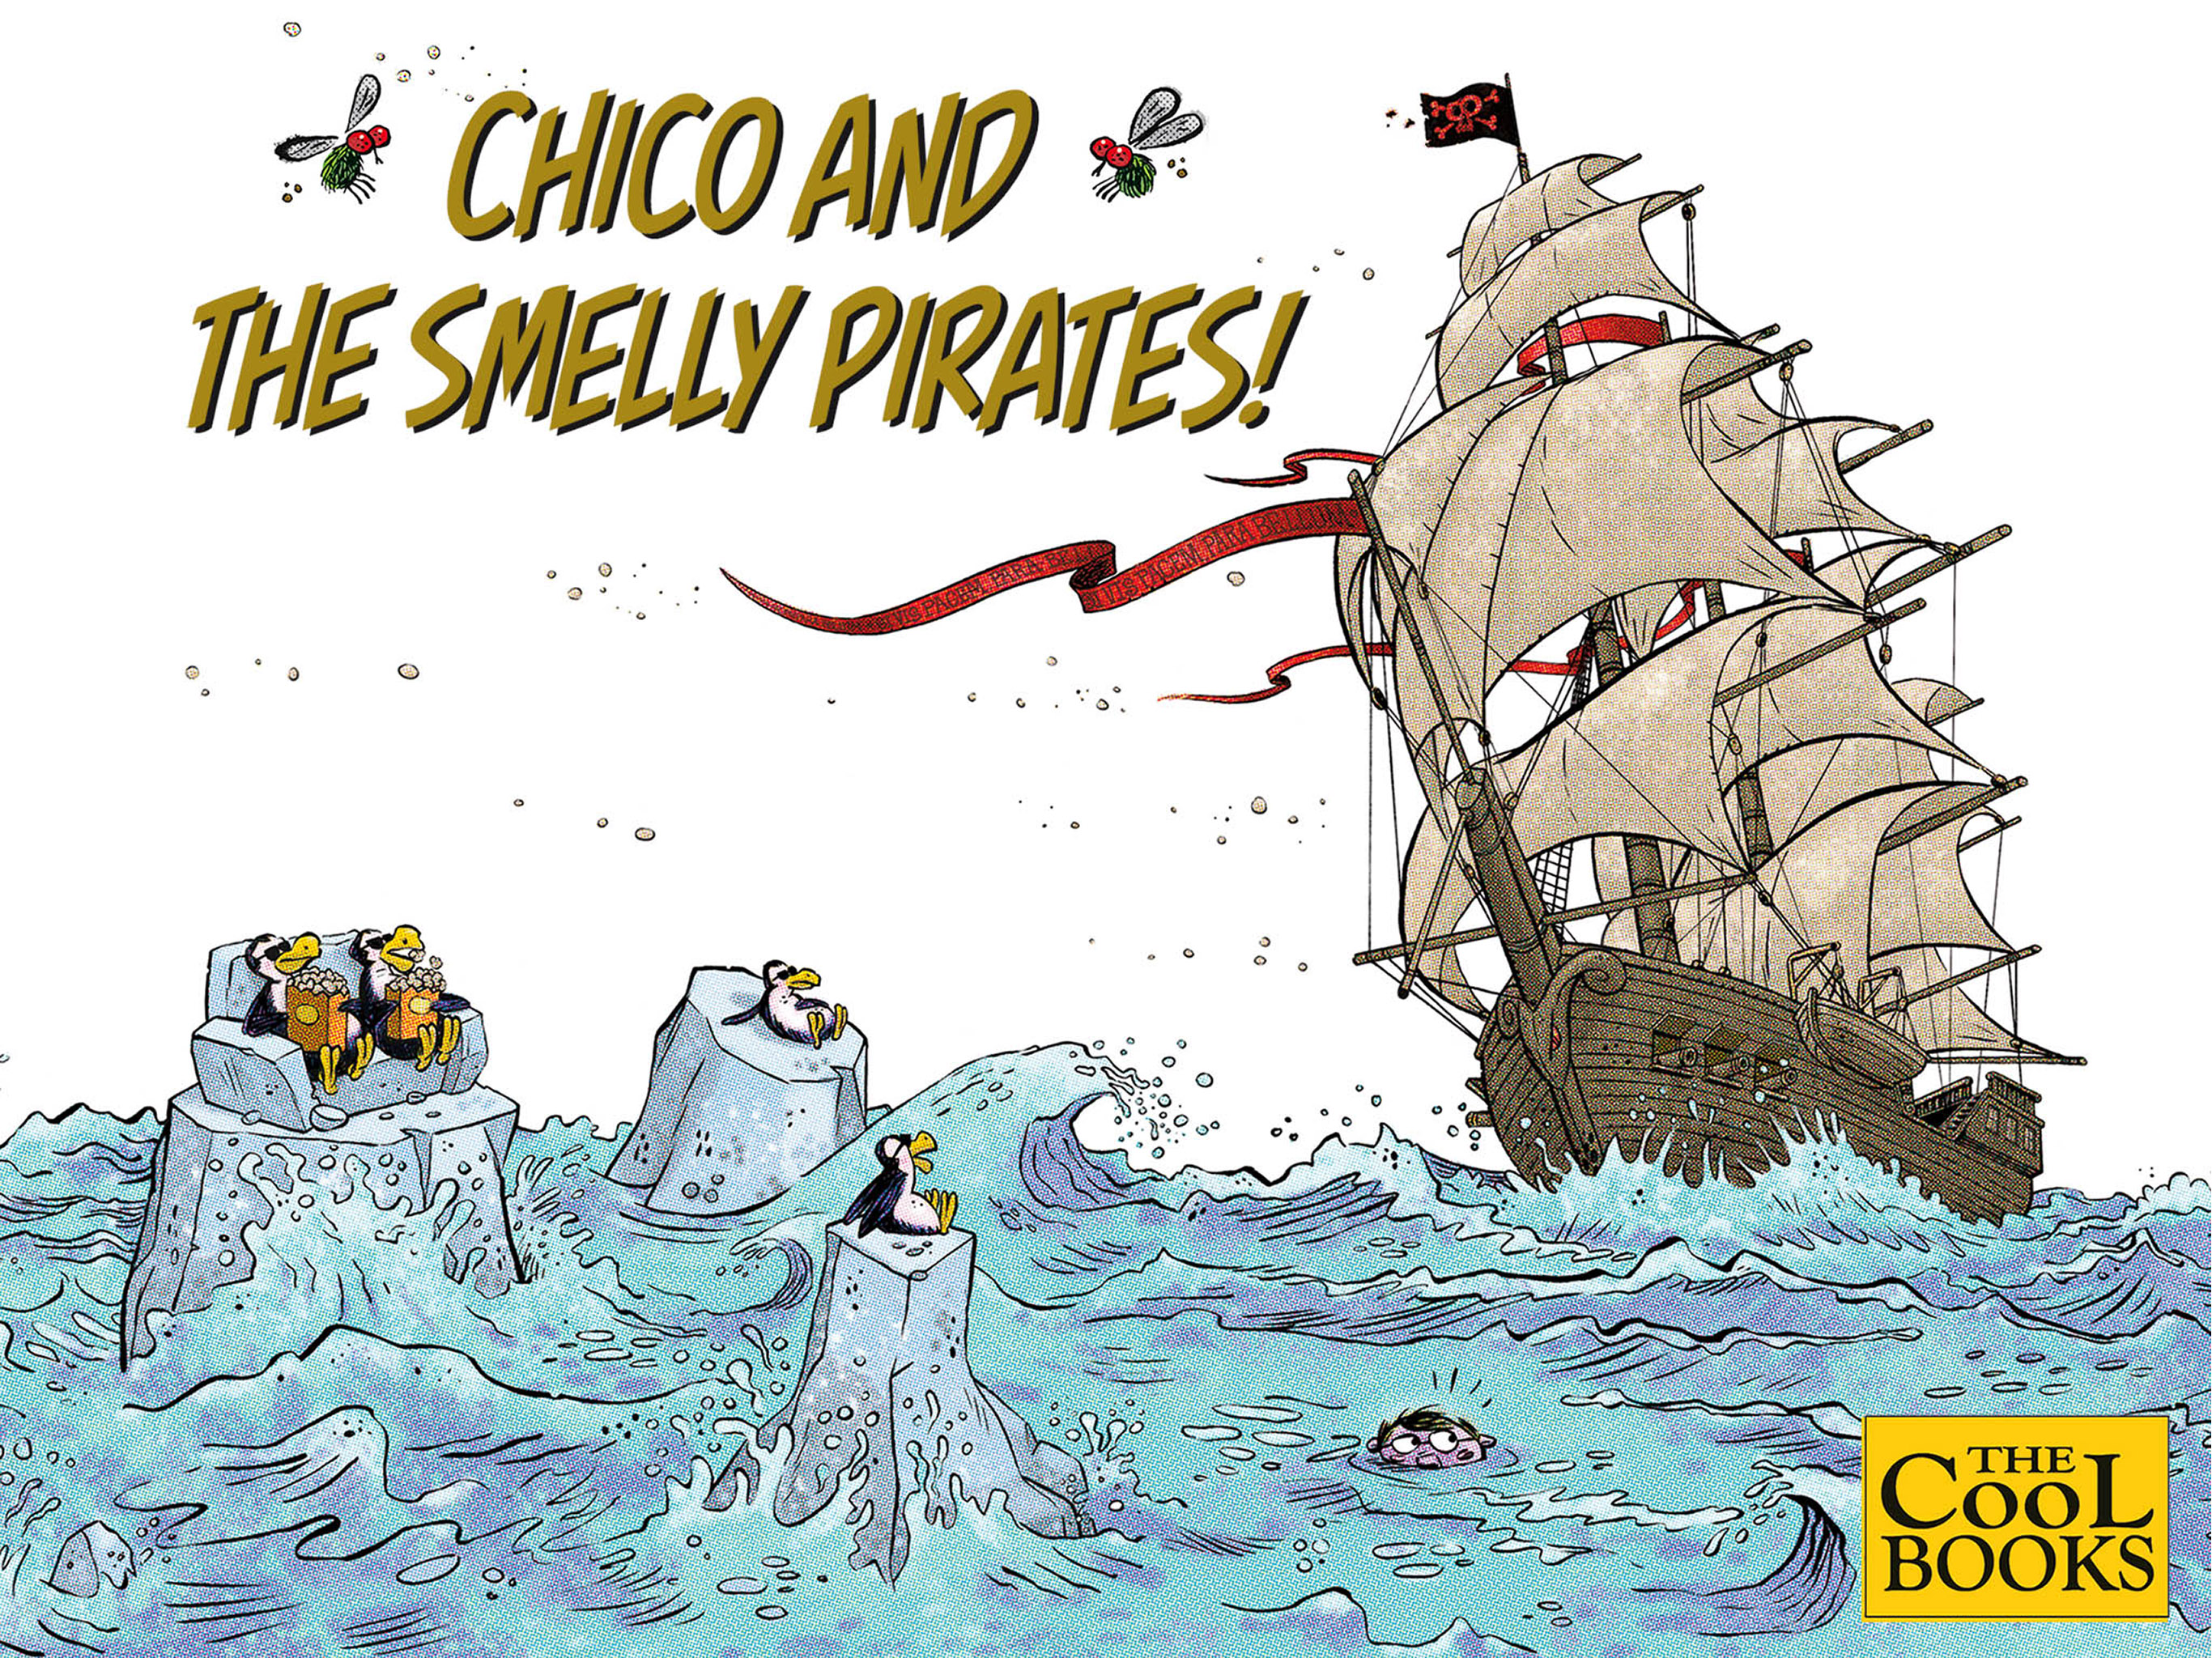 Chico and the Smelly Pirates